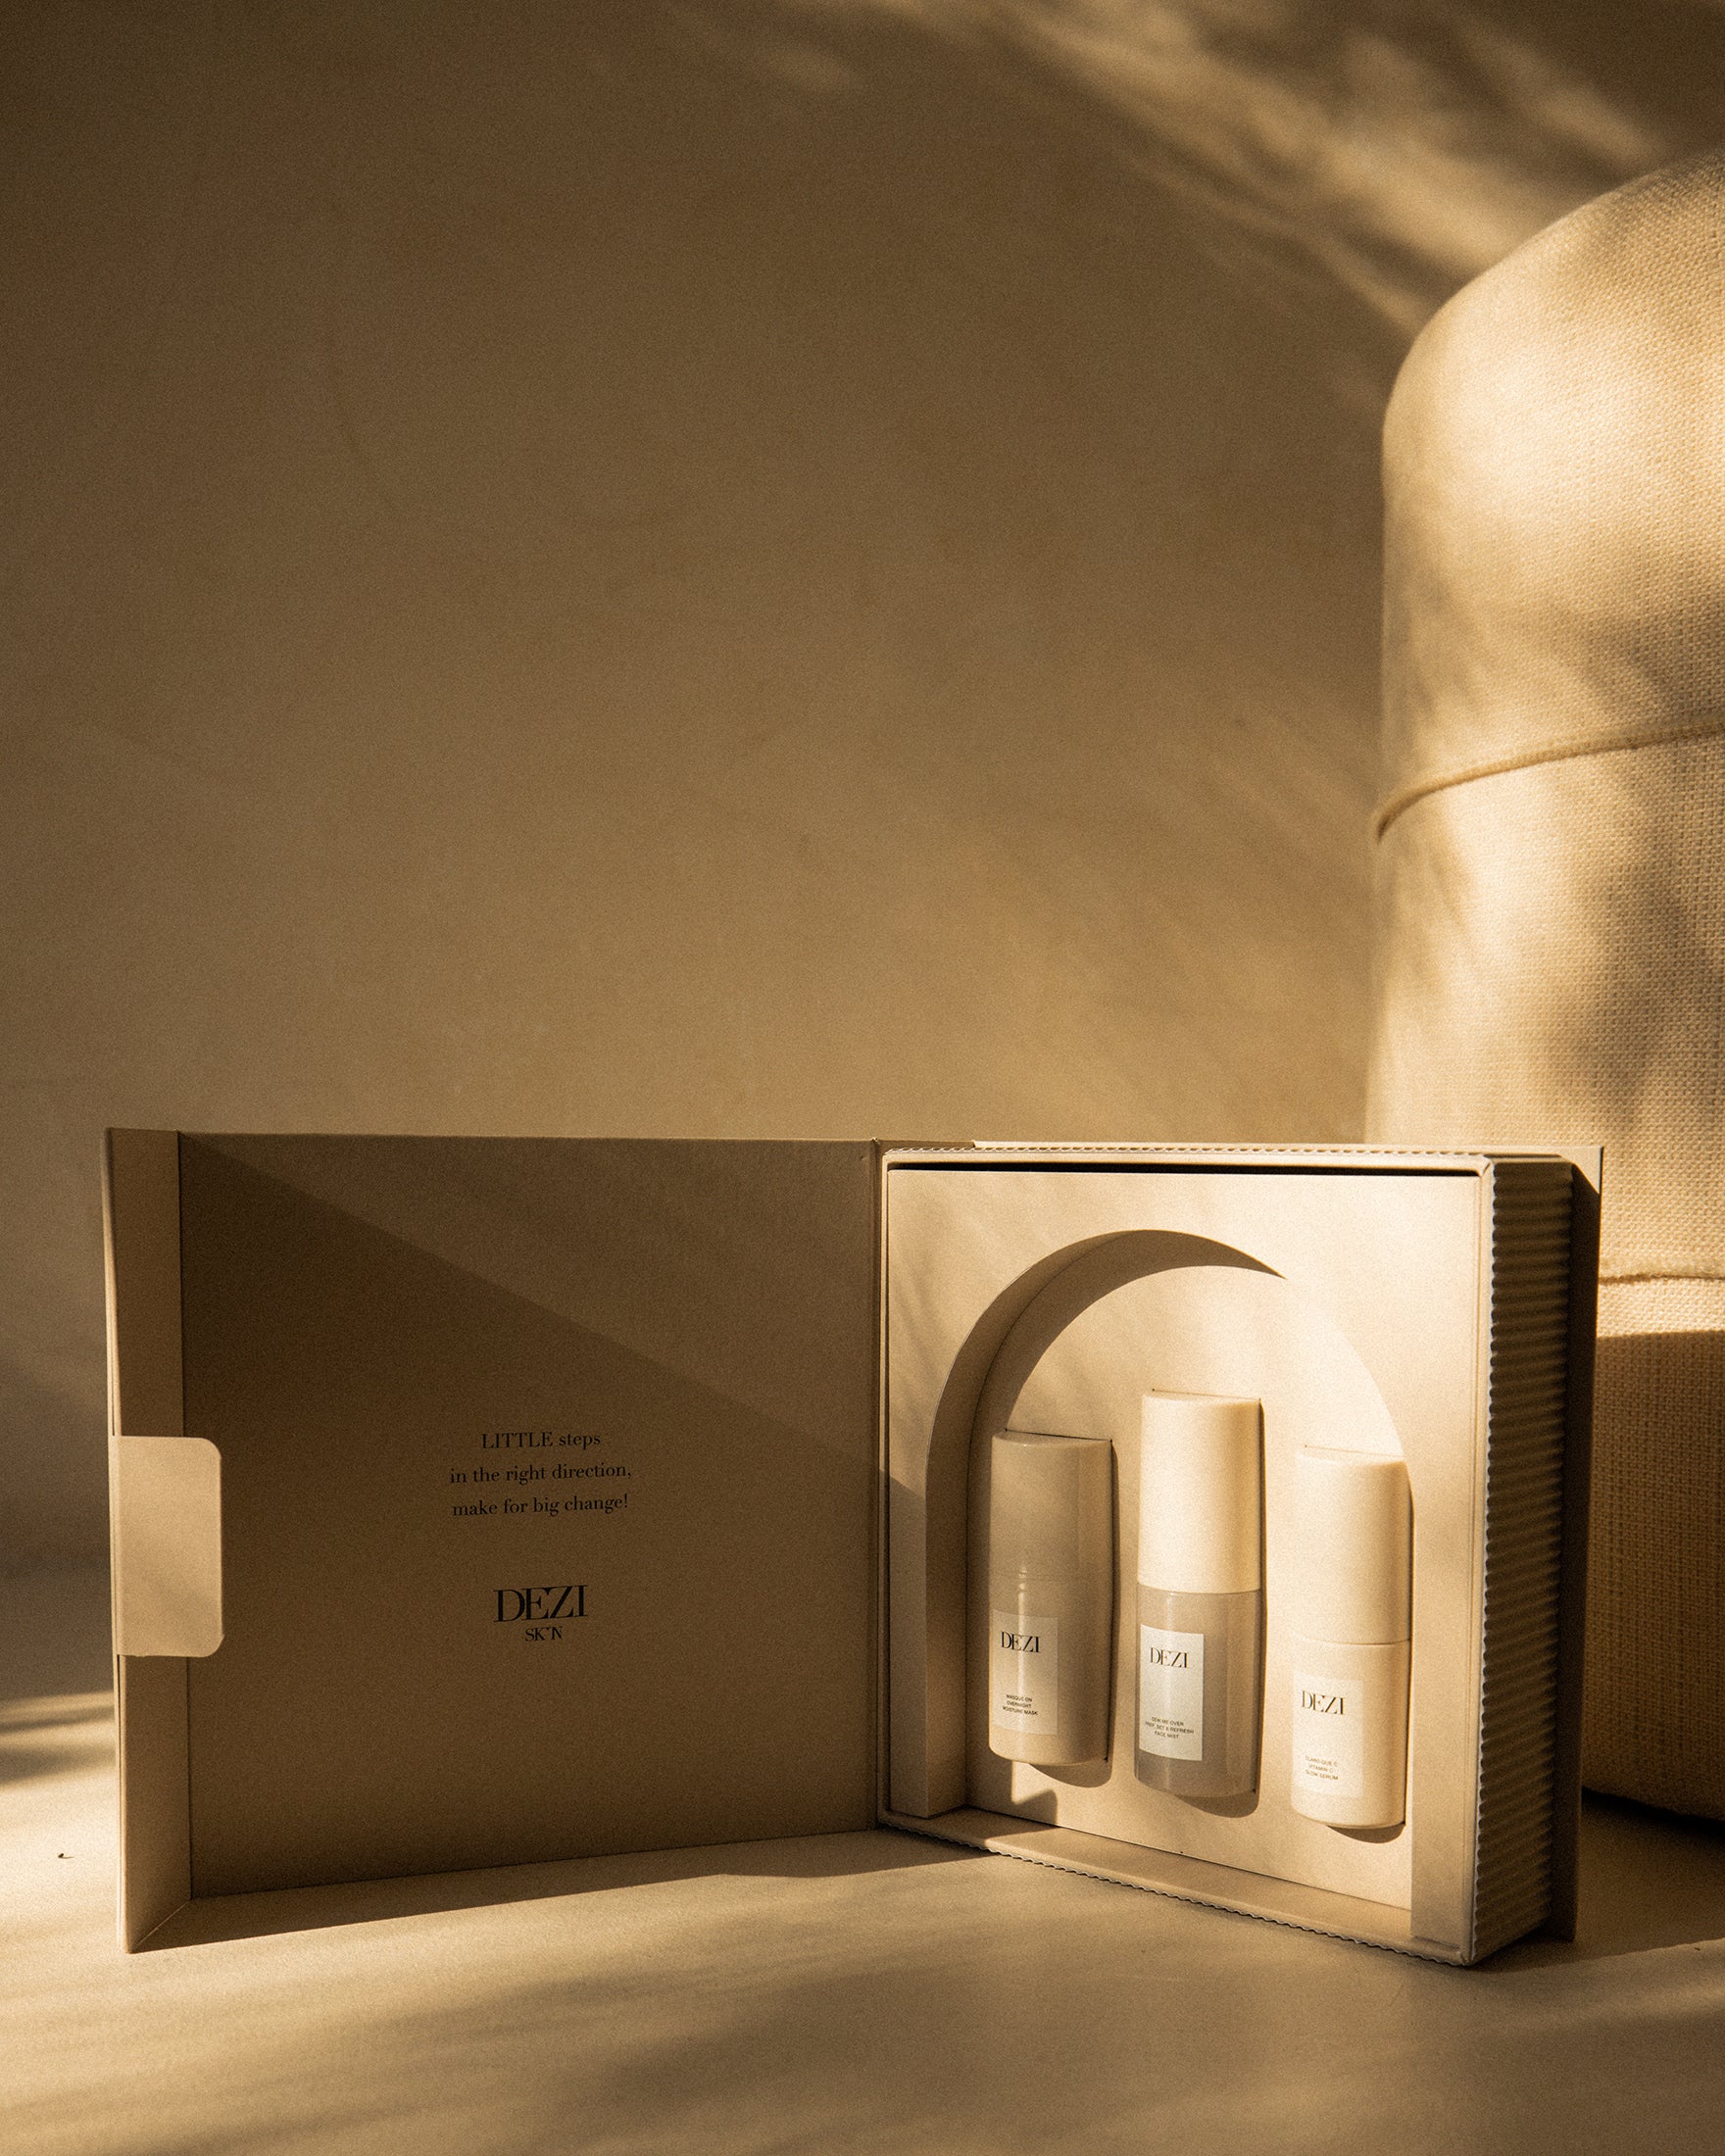 This shows three DEZI SKIN travel size products in the custom box. They are sitting in a tray that is shaped like an arch, inspired by architecture.